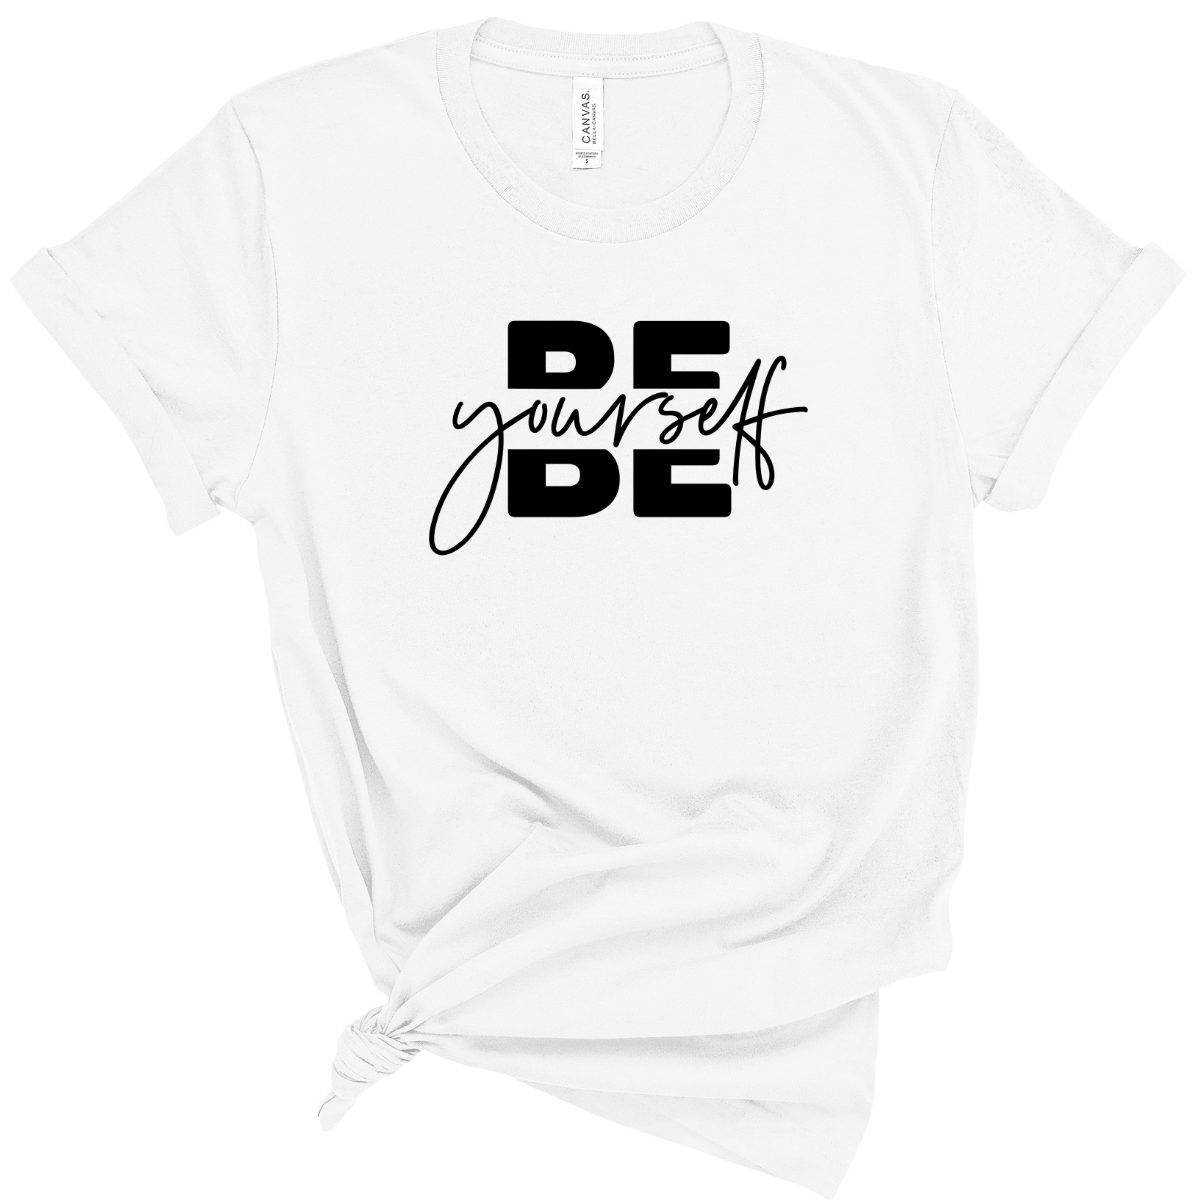 Be Yourself T-Shirt